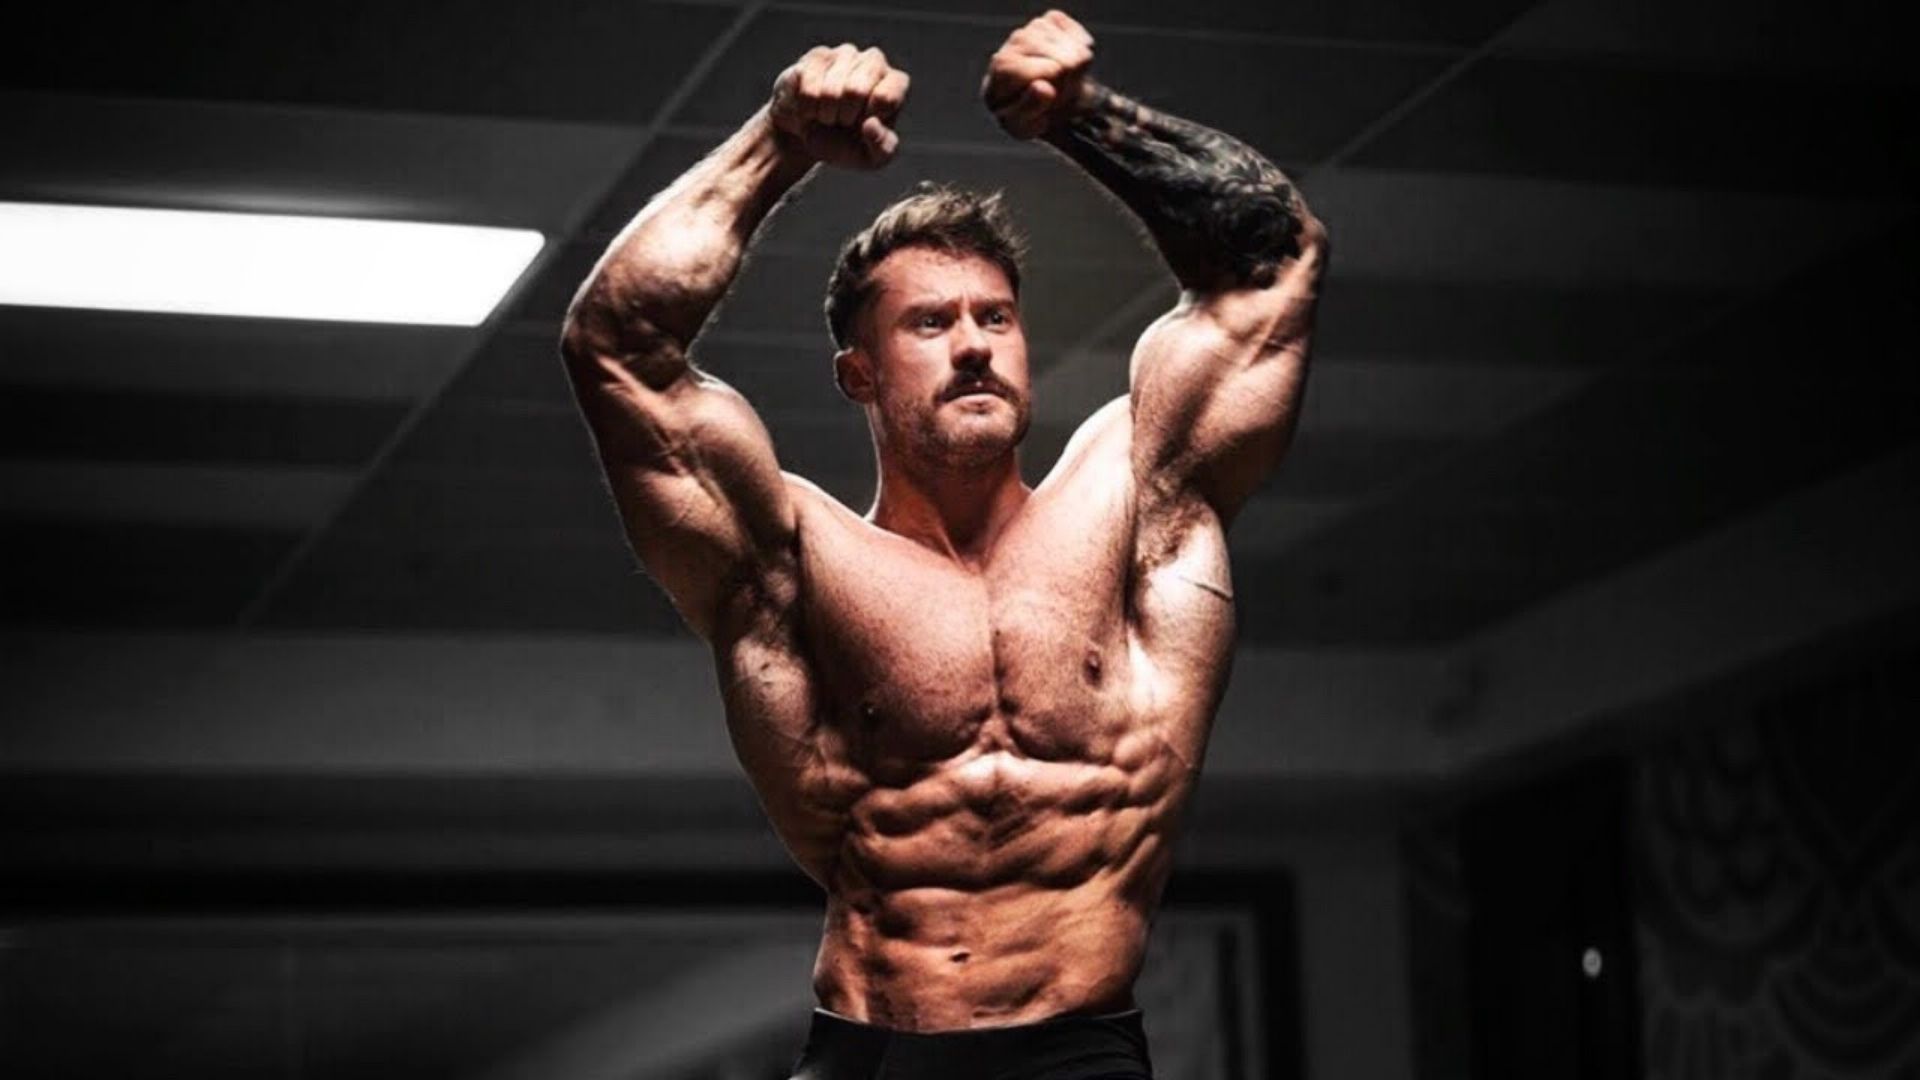 Wondering If Chris Bumstead Is On Steroids? Read This!